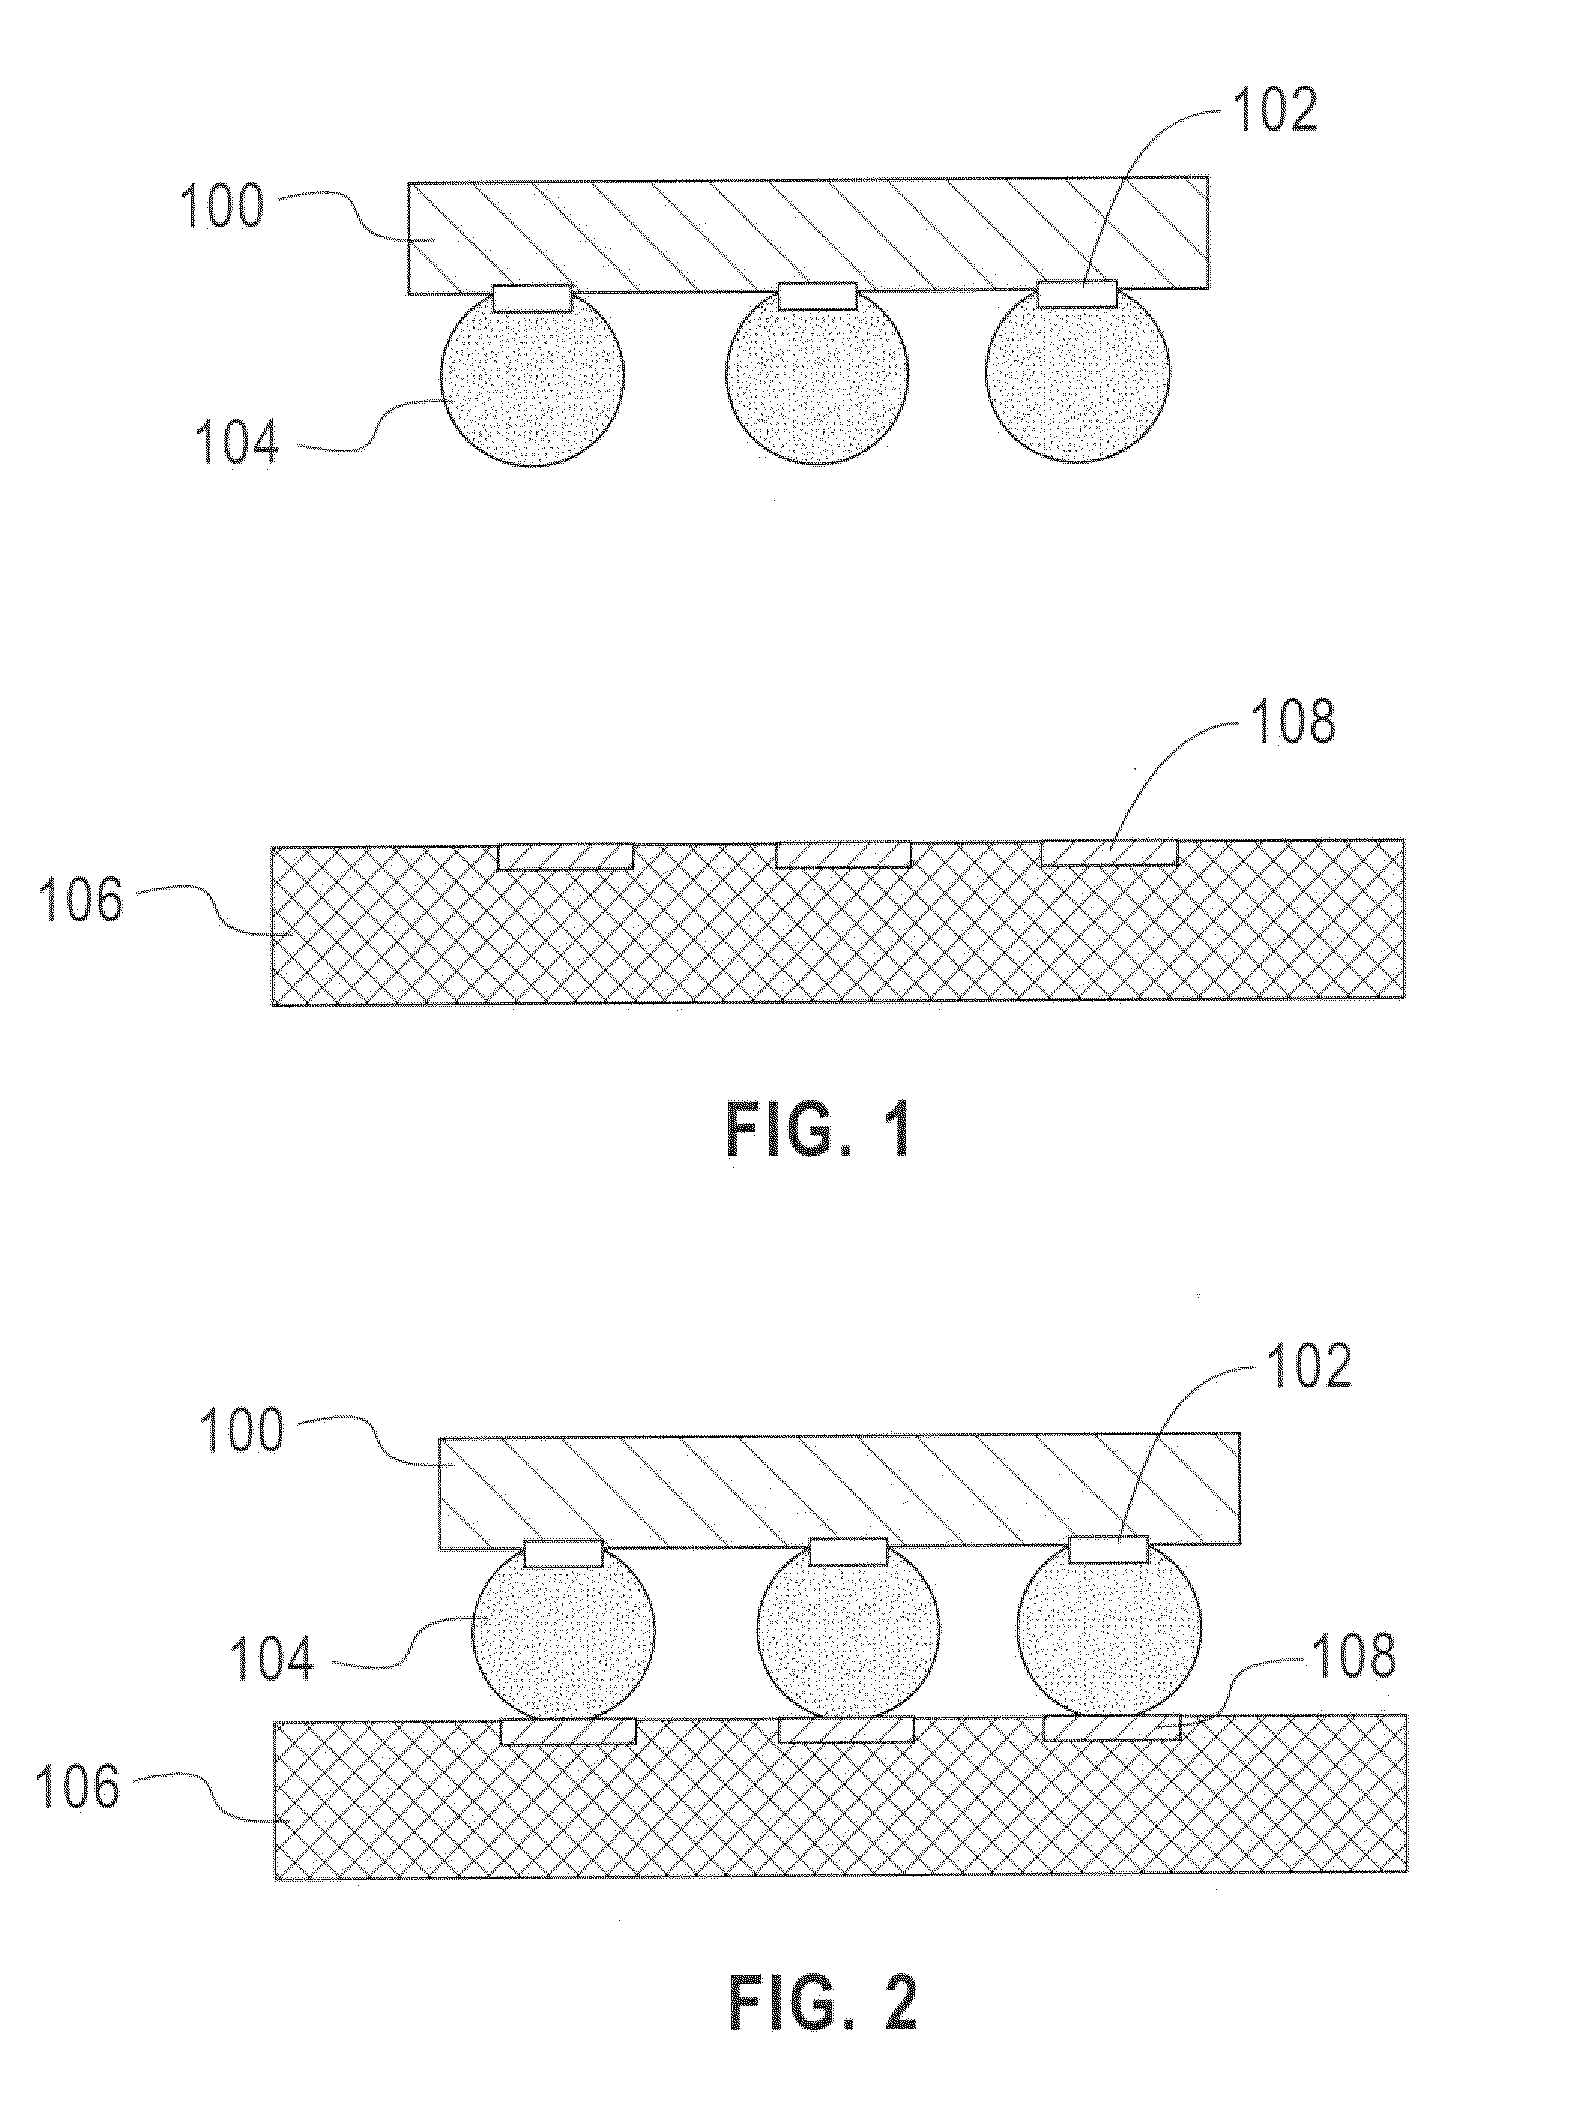 Method of joining a chip on a substrate